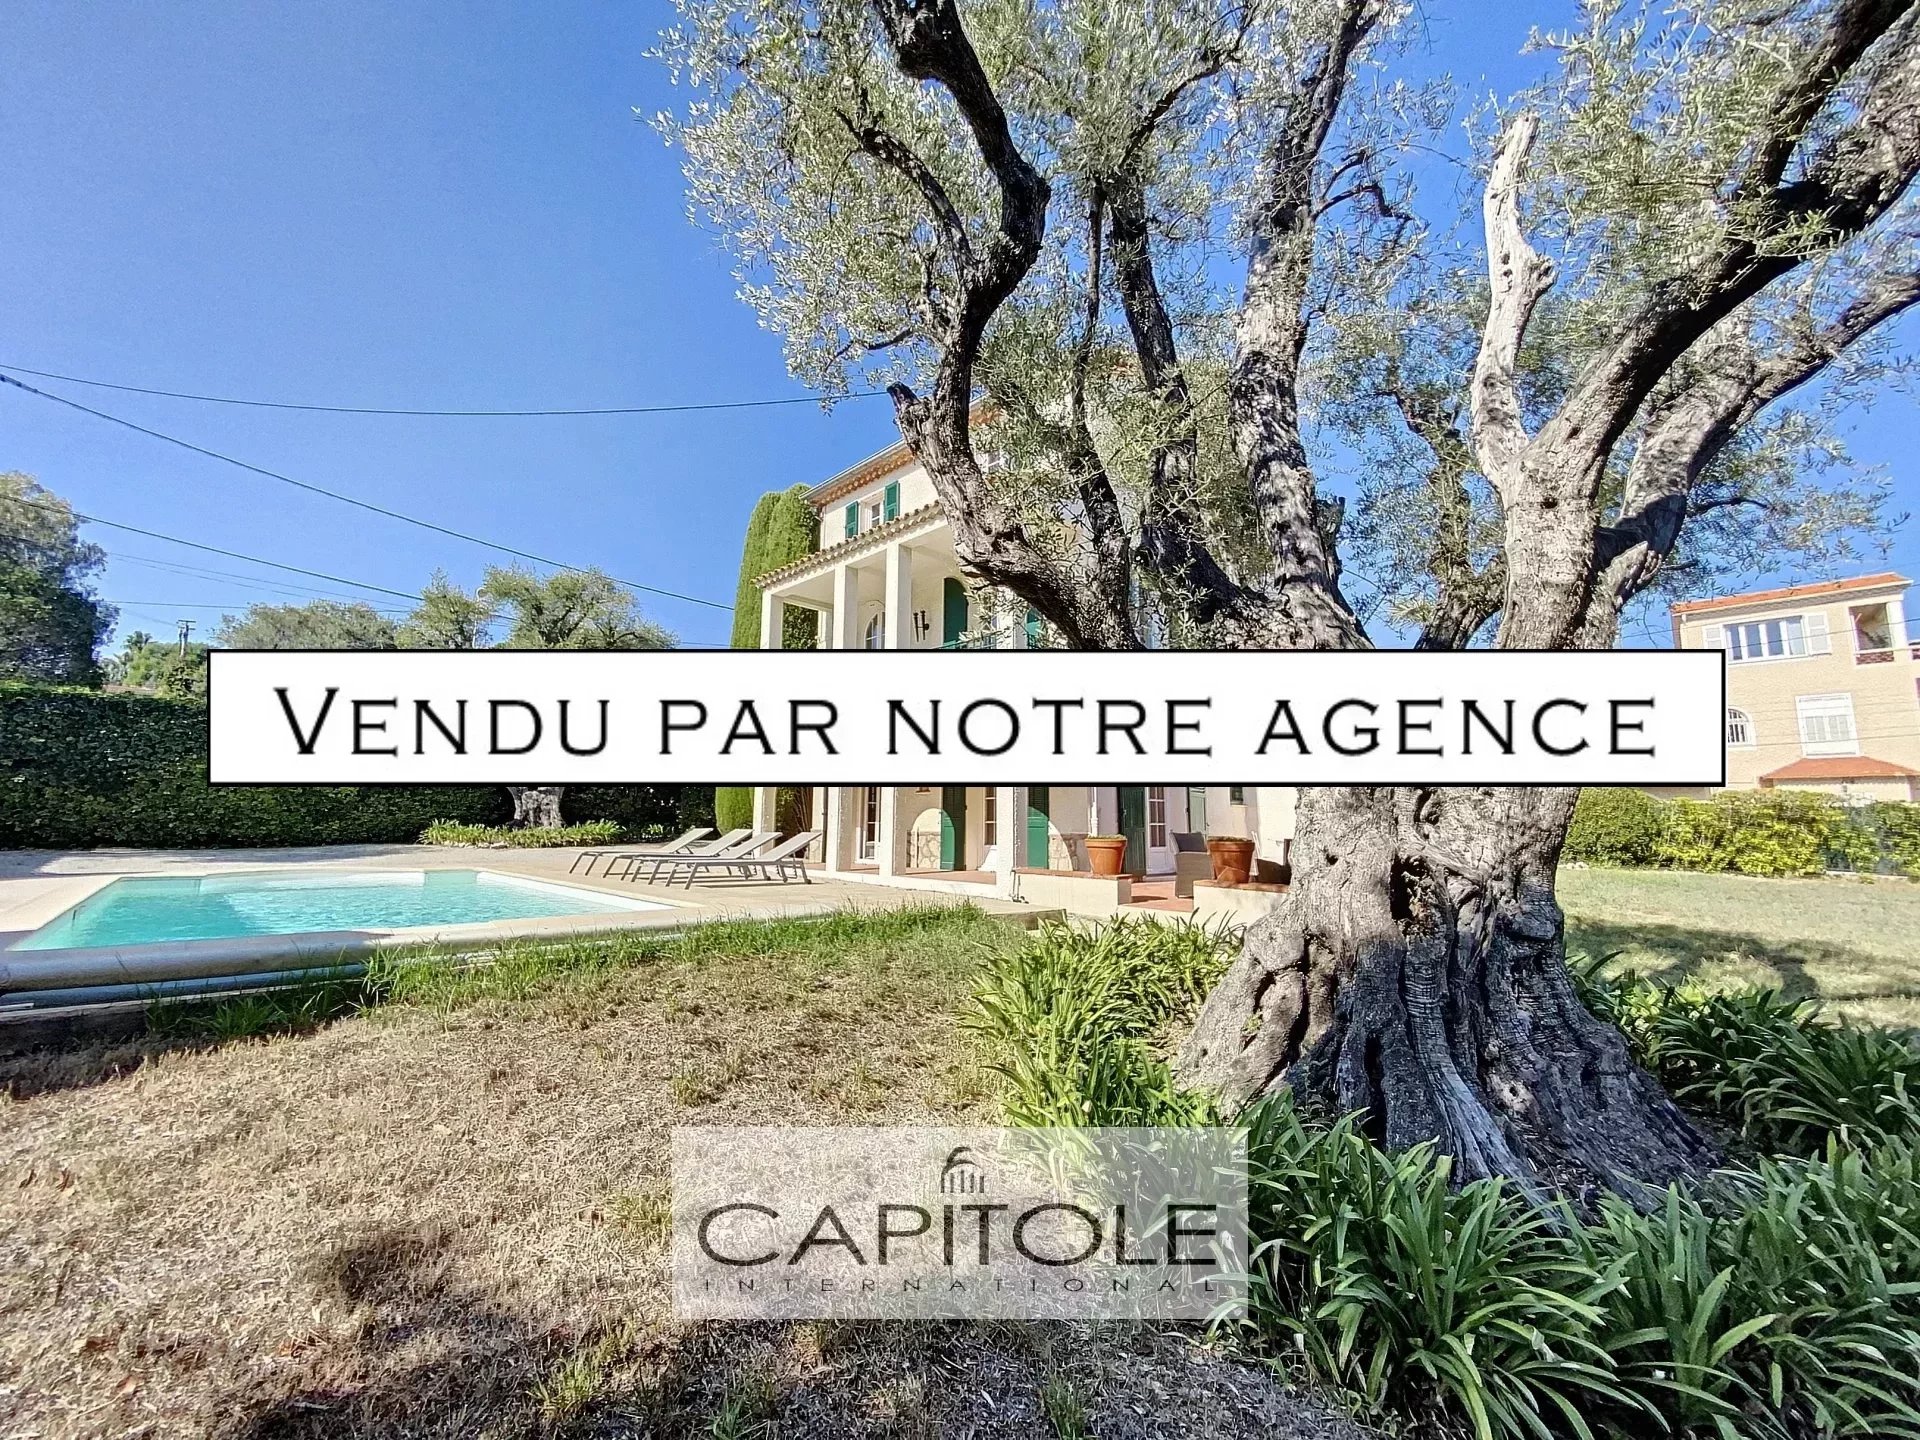 For sale, Cap d'Antibes, 208 m² family house, wooded garden,